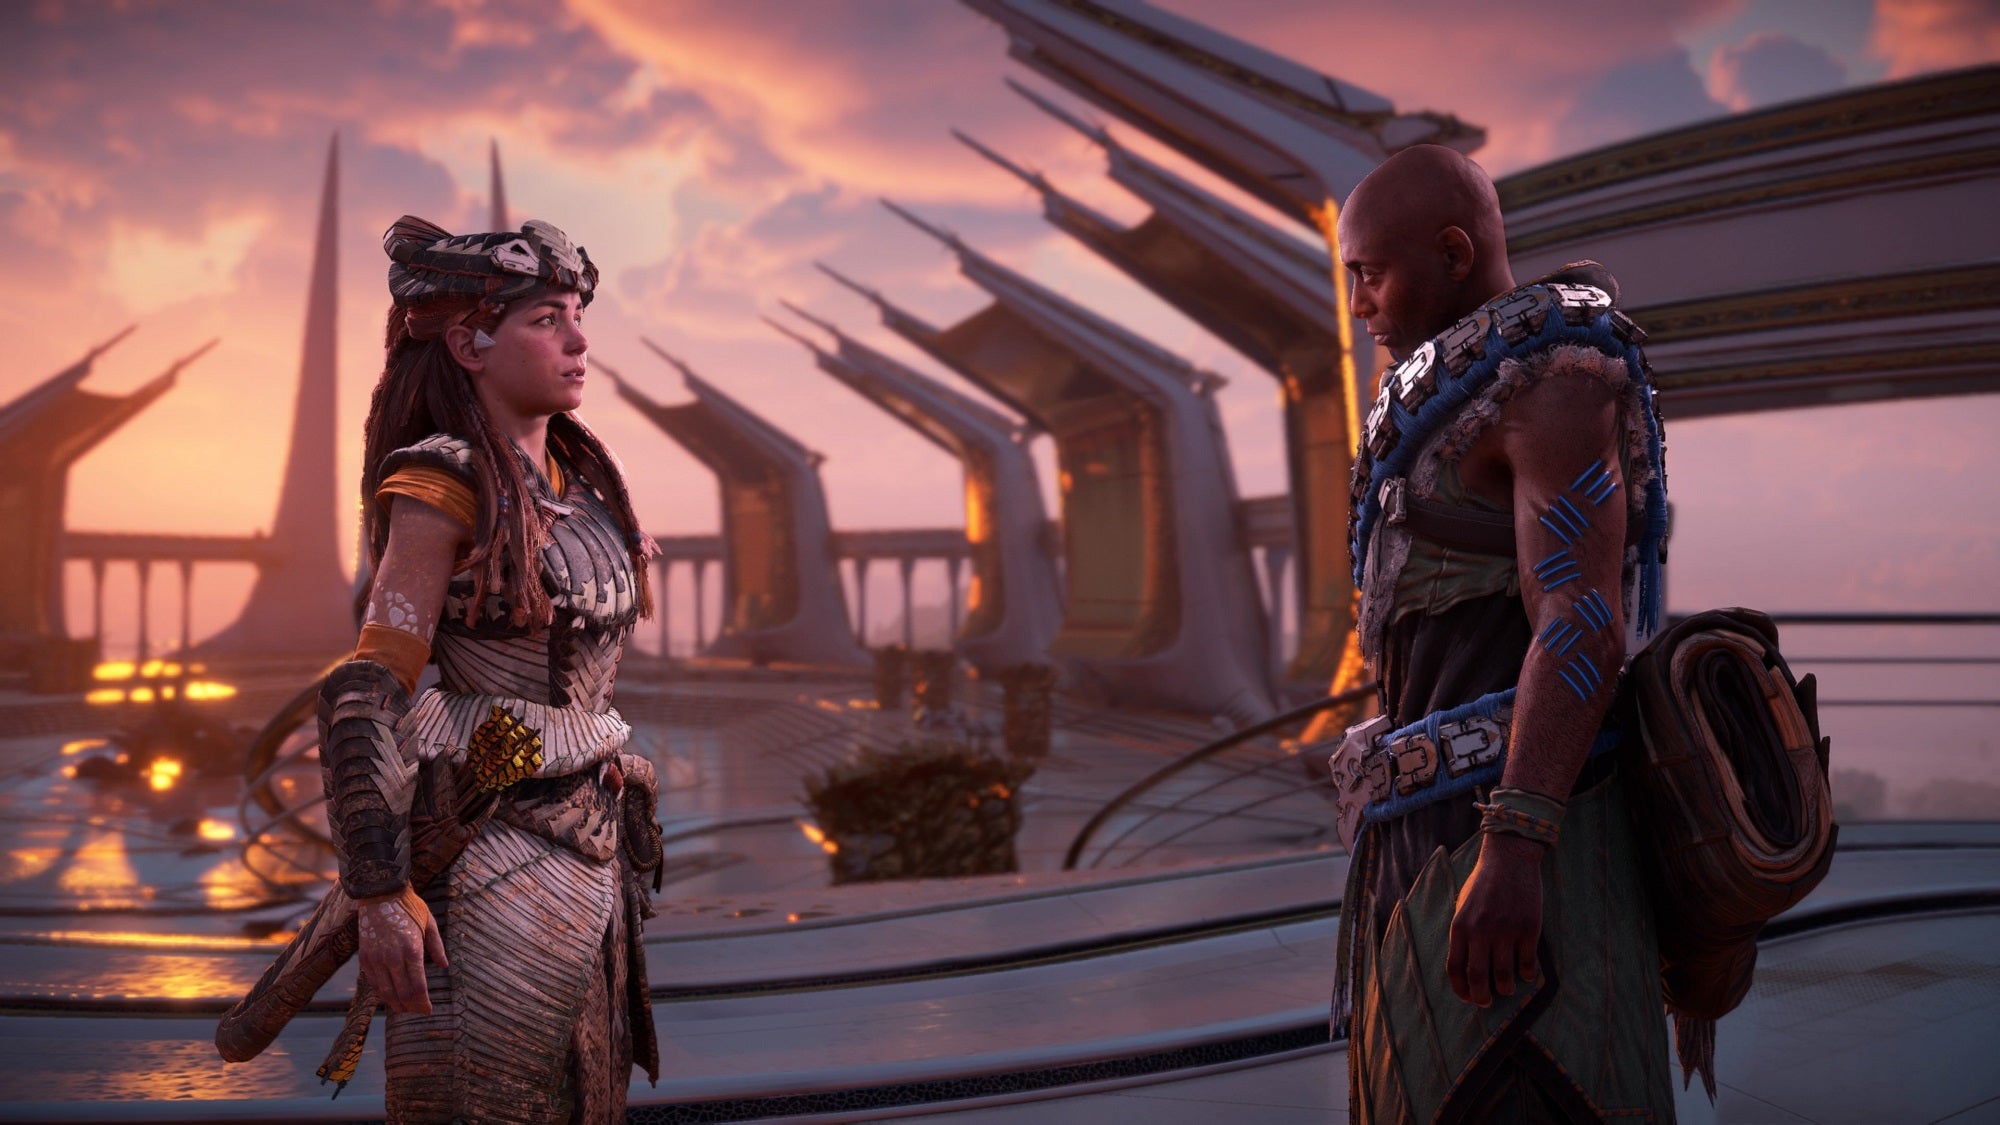 5 secrets from Horizon Forbidden West's gameplay reveal you may have missed